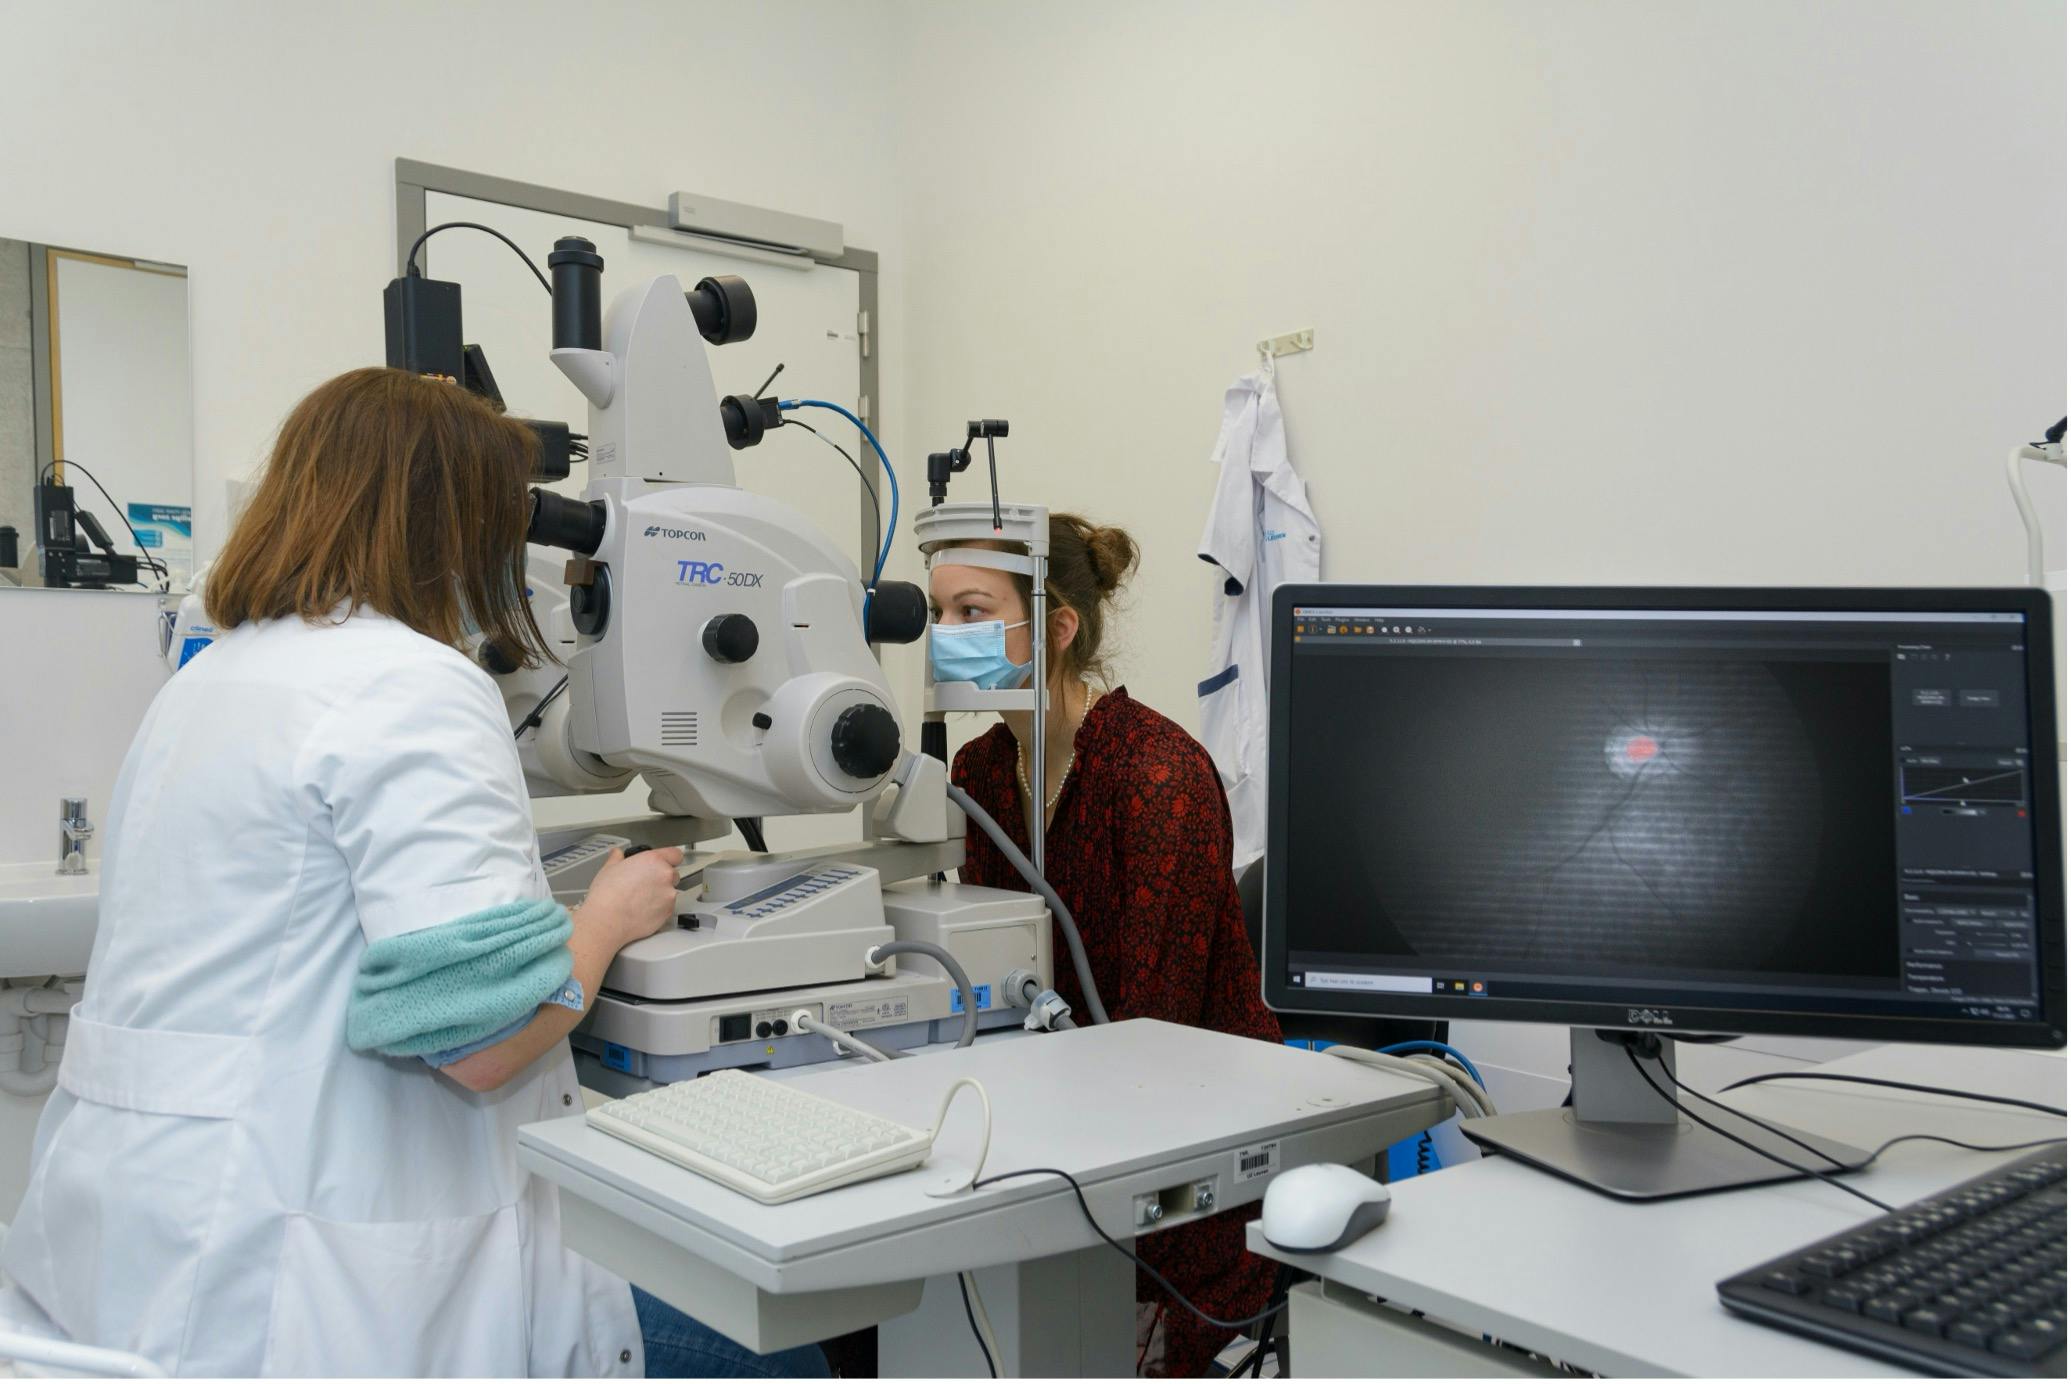 Setup of combined hyperspectral and fundus camera at Stalmans’ lab. 